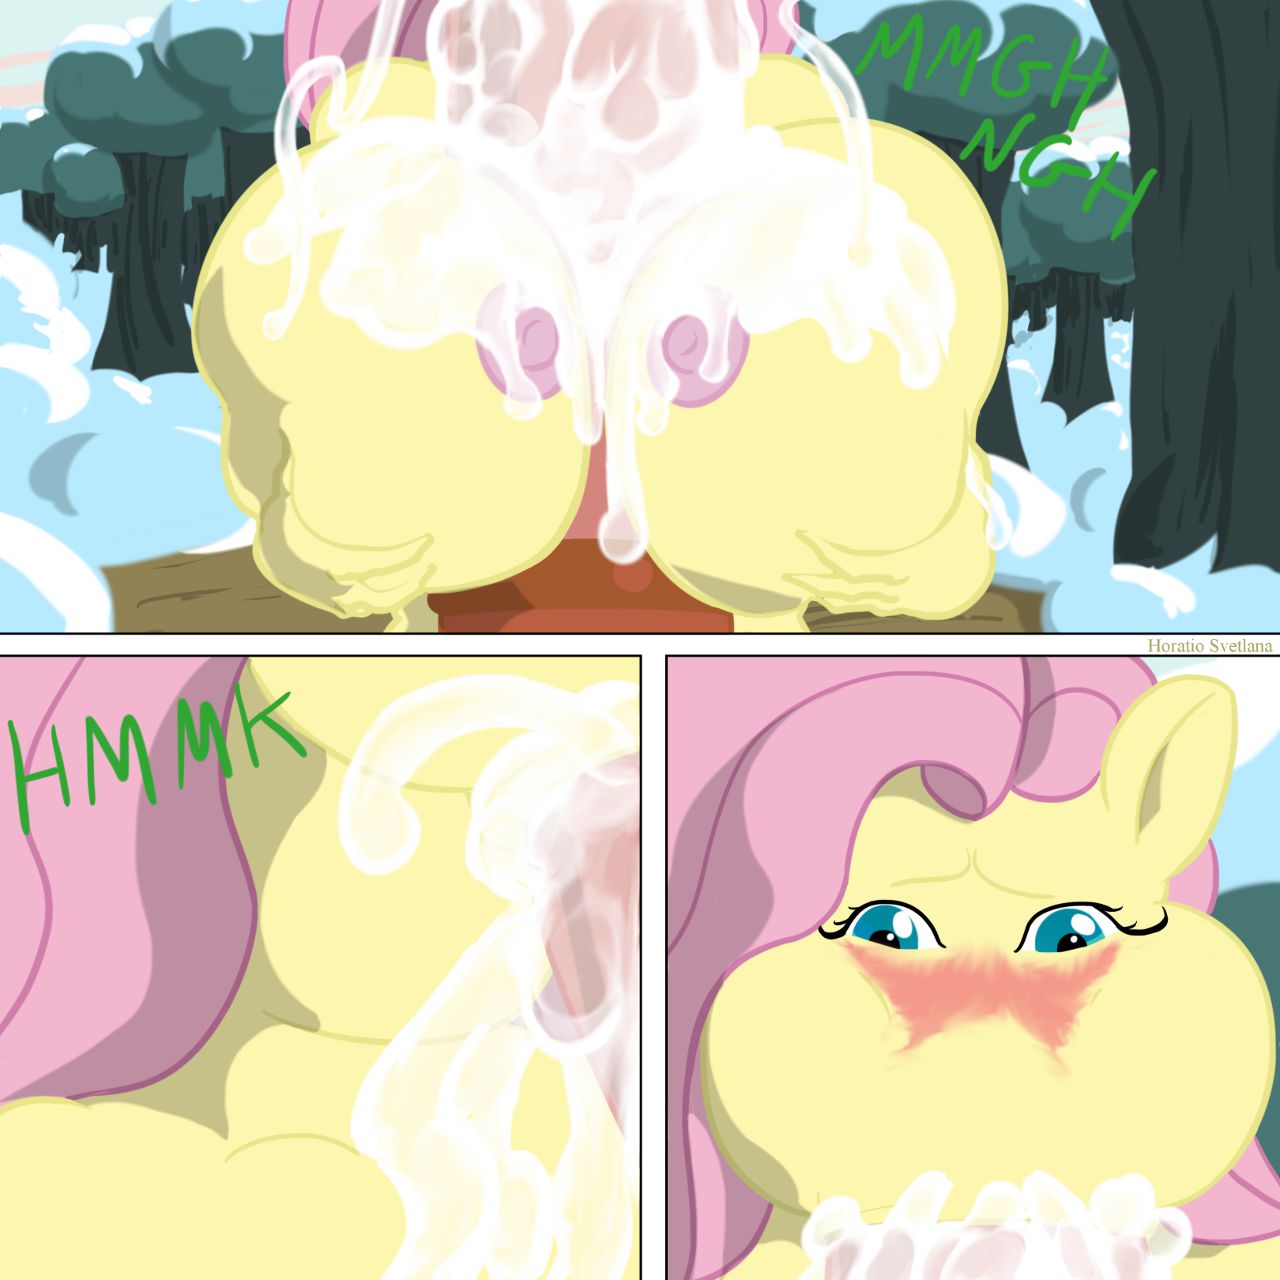 [Horatio Svetlana] Fluttershy's Discord Day (My Little Pony Friendship Is Magic) [Ongoing] 9